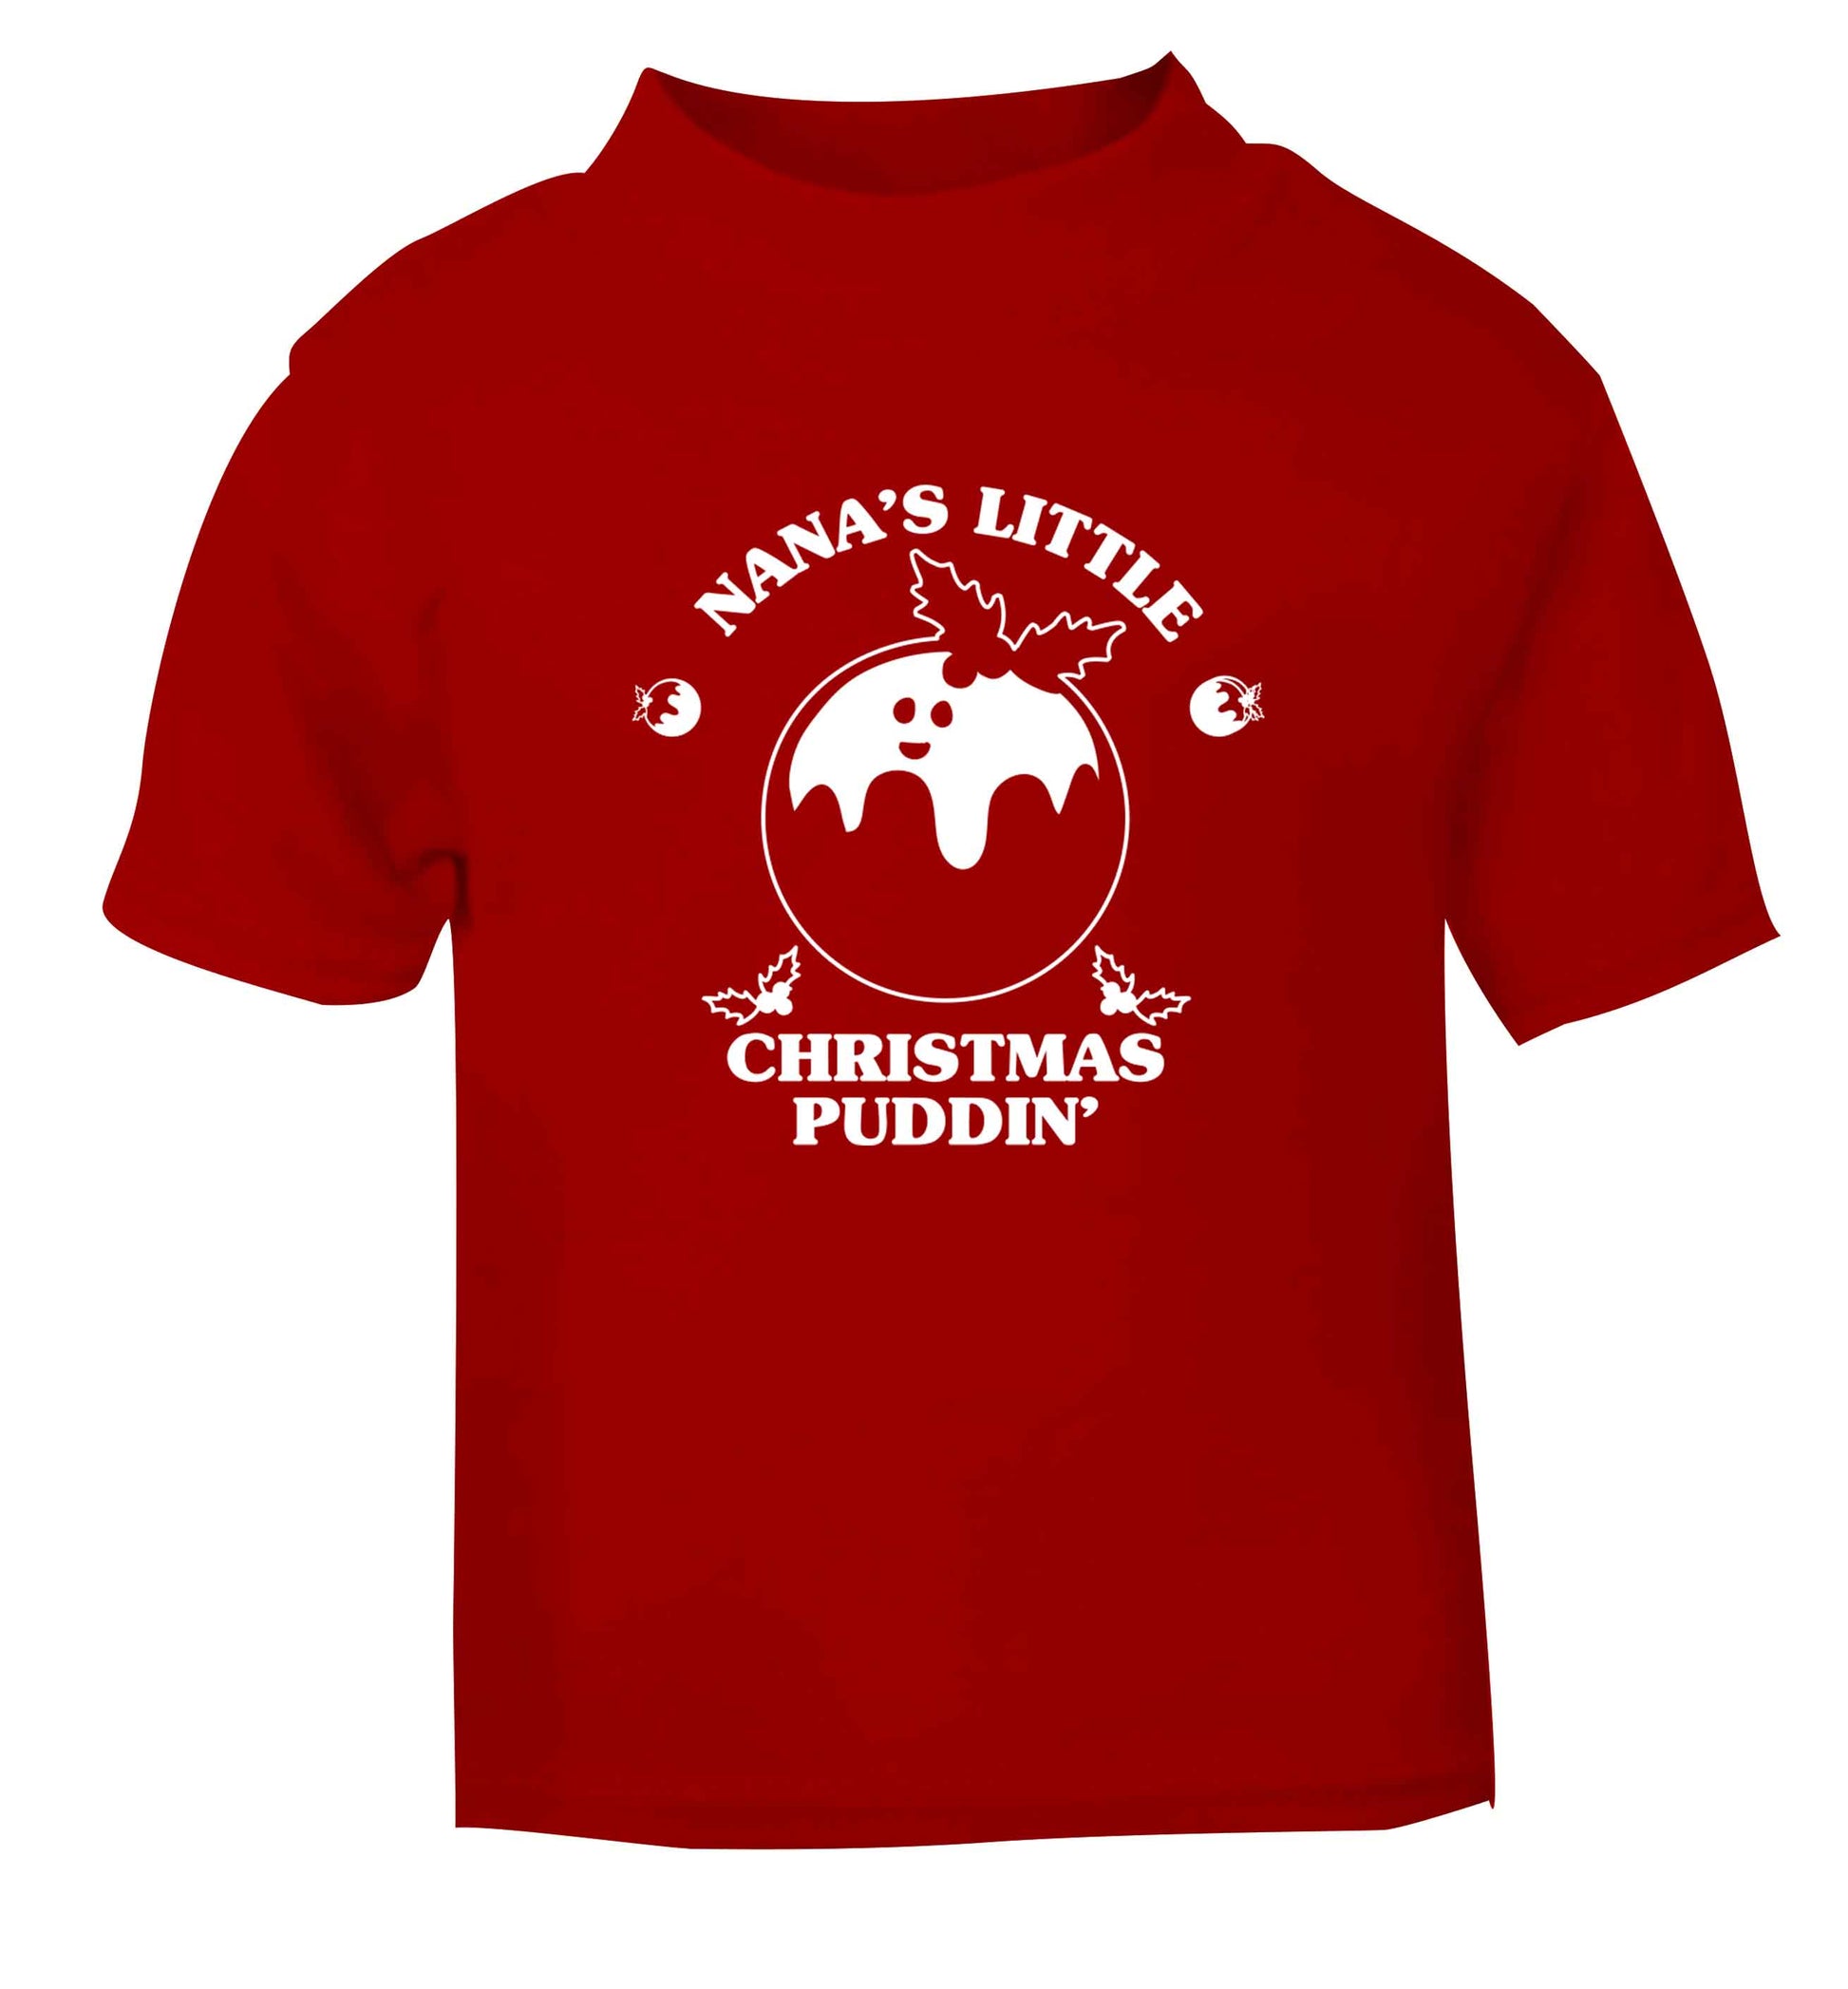 Nana's little Christmas puddin' red Baby Toddler Tshirt 2 Years